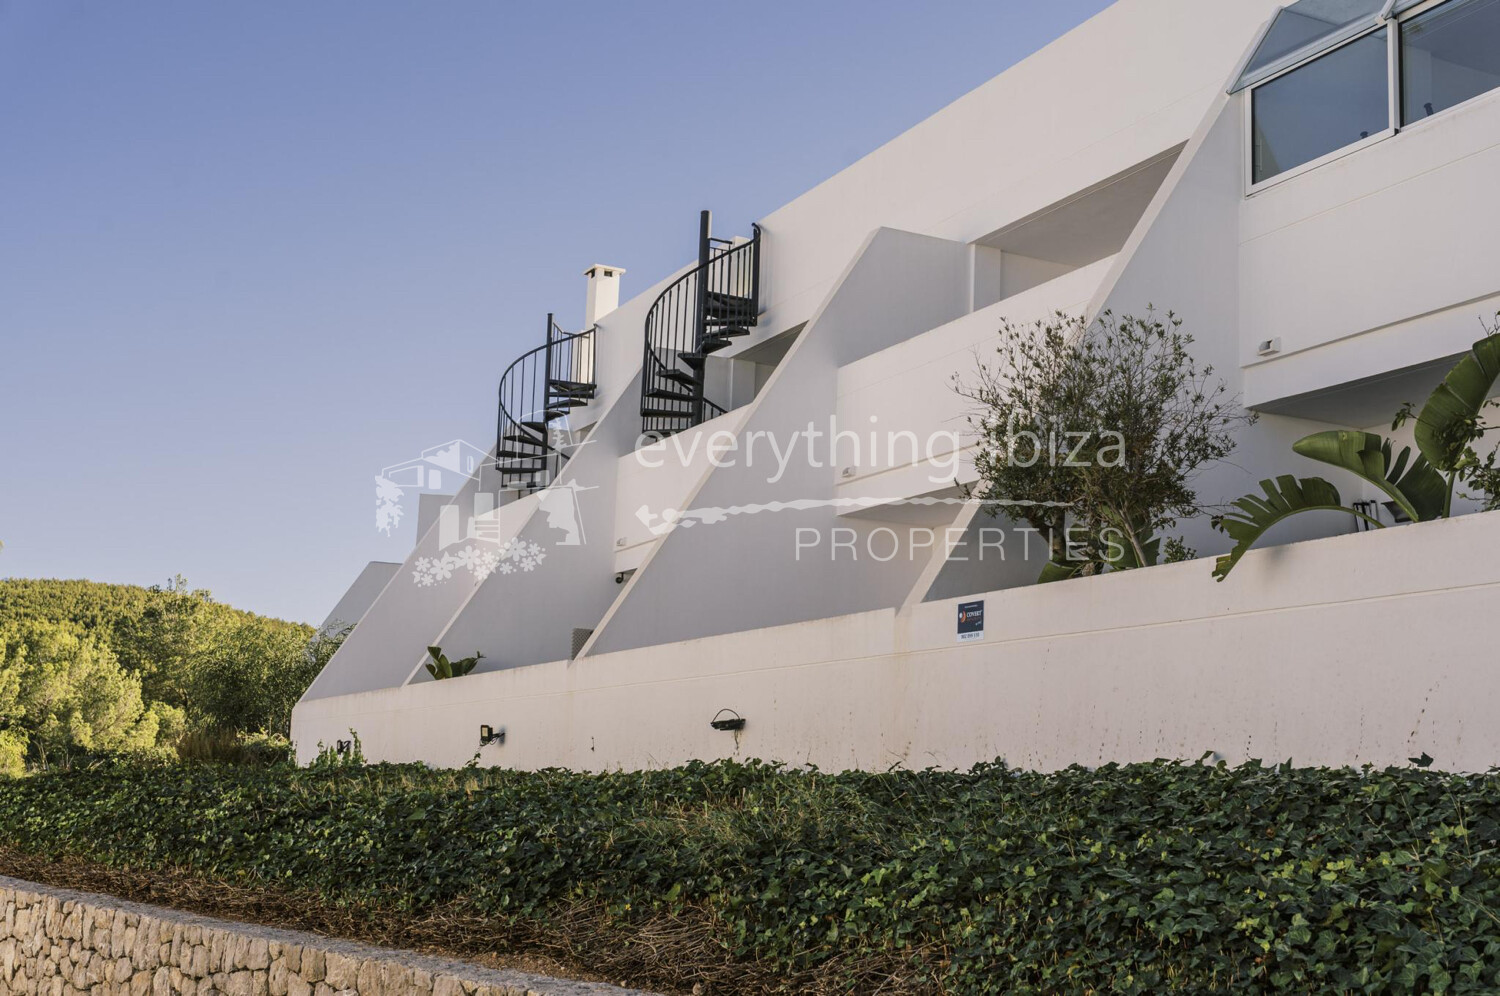 Delightful Townhouse in Stunning Rural Setting Near Roca Llisa Golf Course, ref. 1677, on sale in Ibiza by everything ibiza Properties